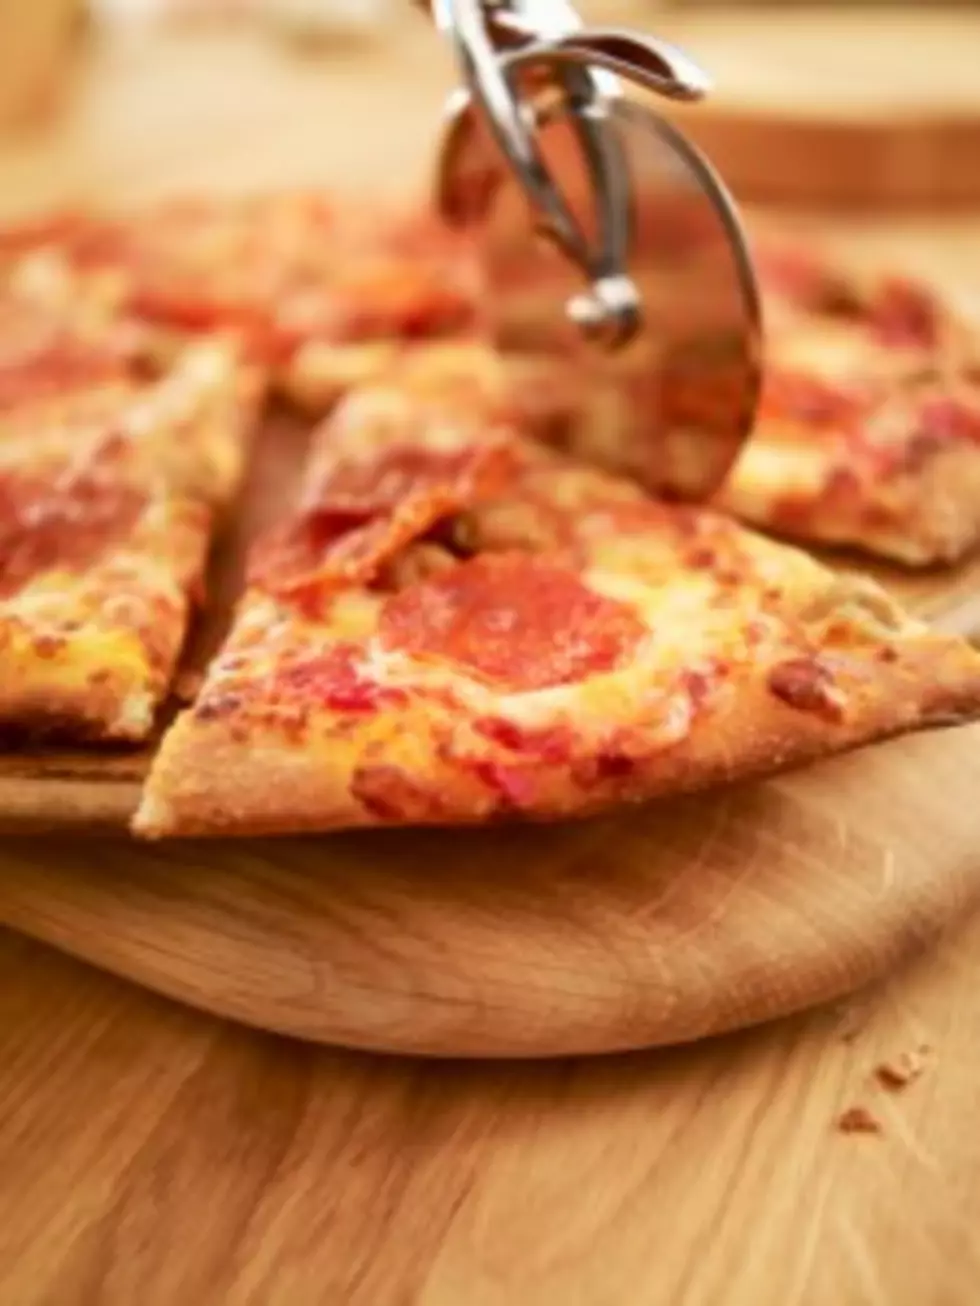 Yahoo Names Best Pizza Place in Montana